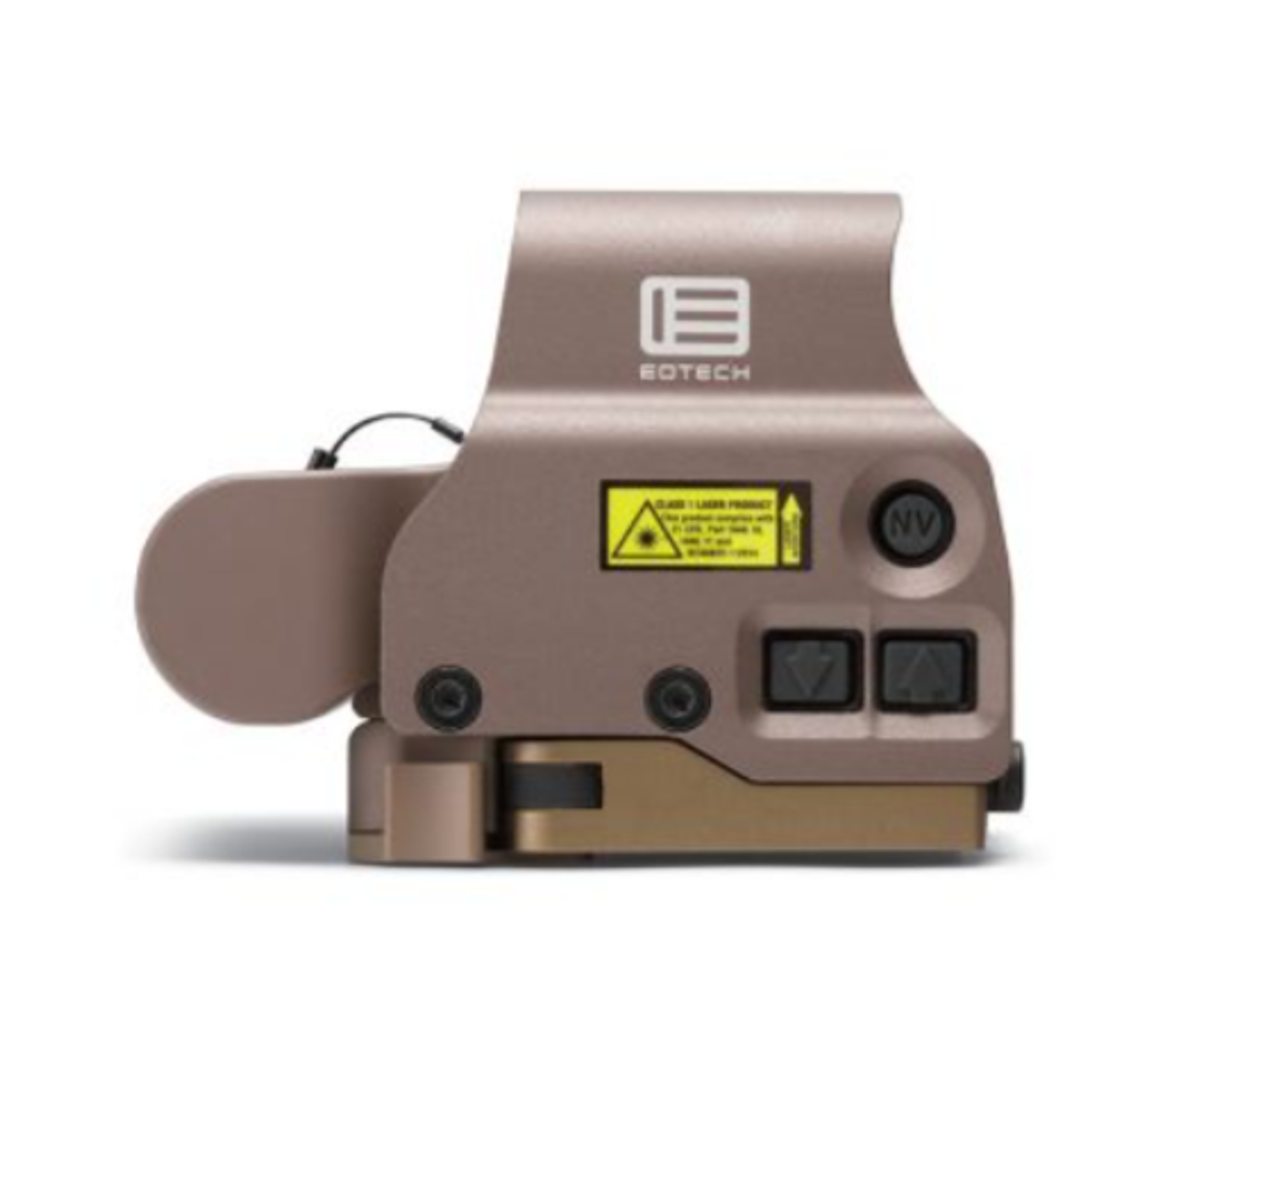 EOTech EXPS3-2TAN NIGHT VISION Compatible Holographic Weapon Sight, Single CR123 battery; reticle pattern with 68 MOA ring & 2 MOA dots - side buttons-NV-single QD lever TAN